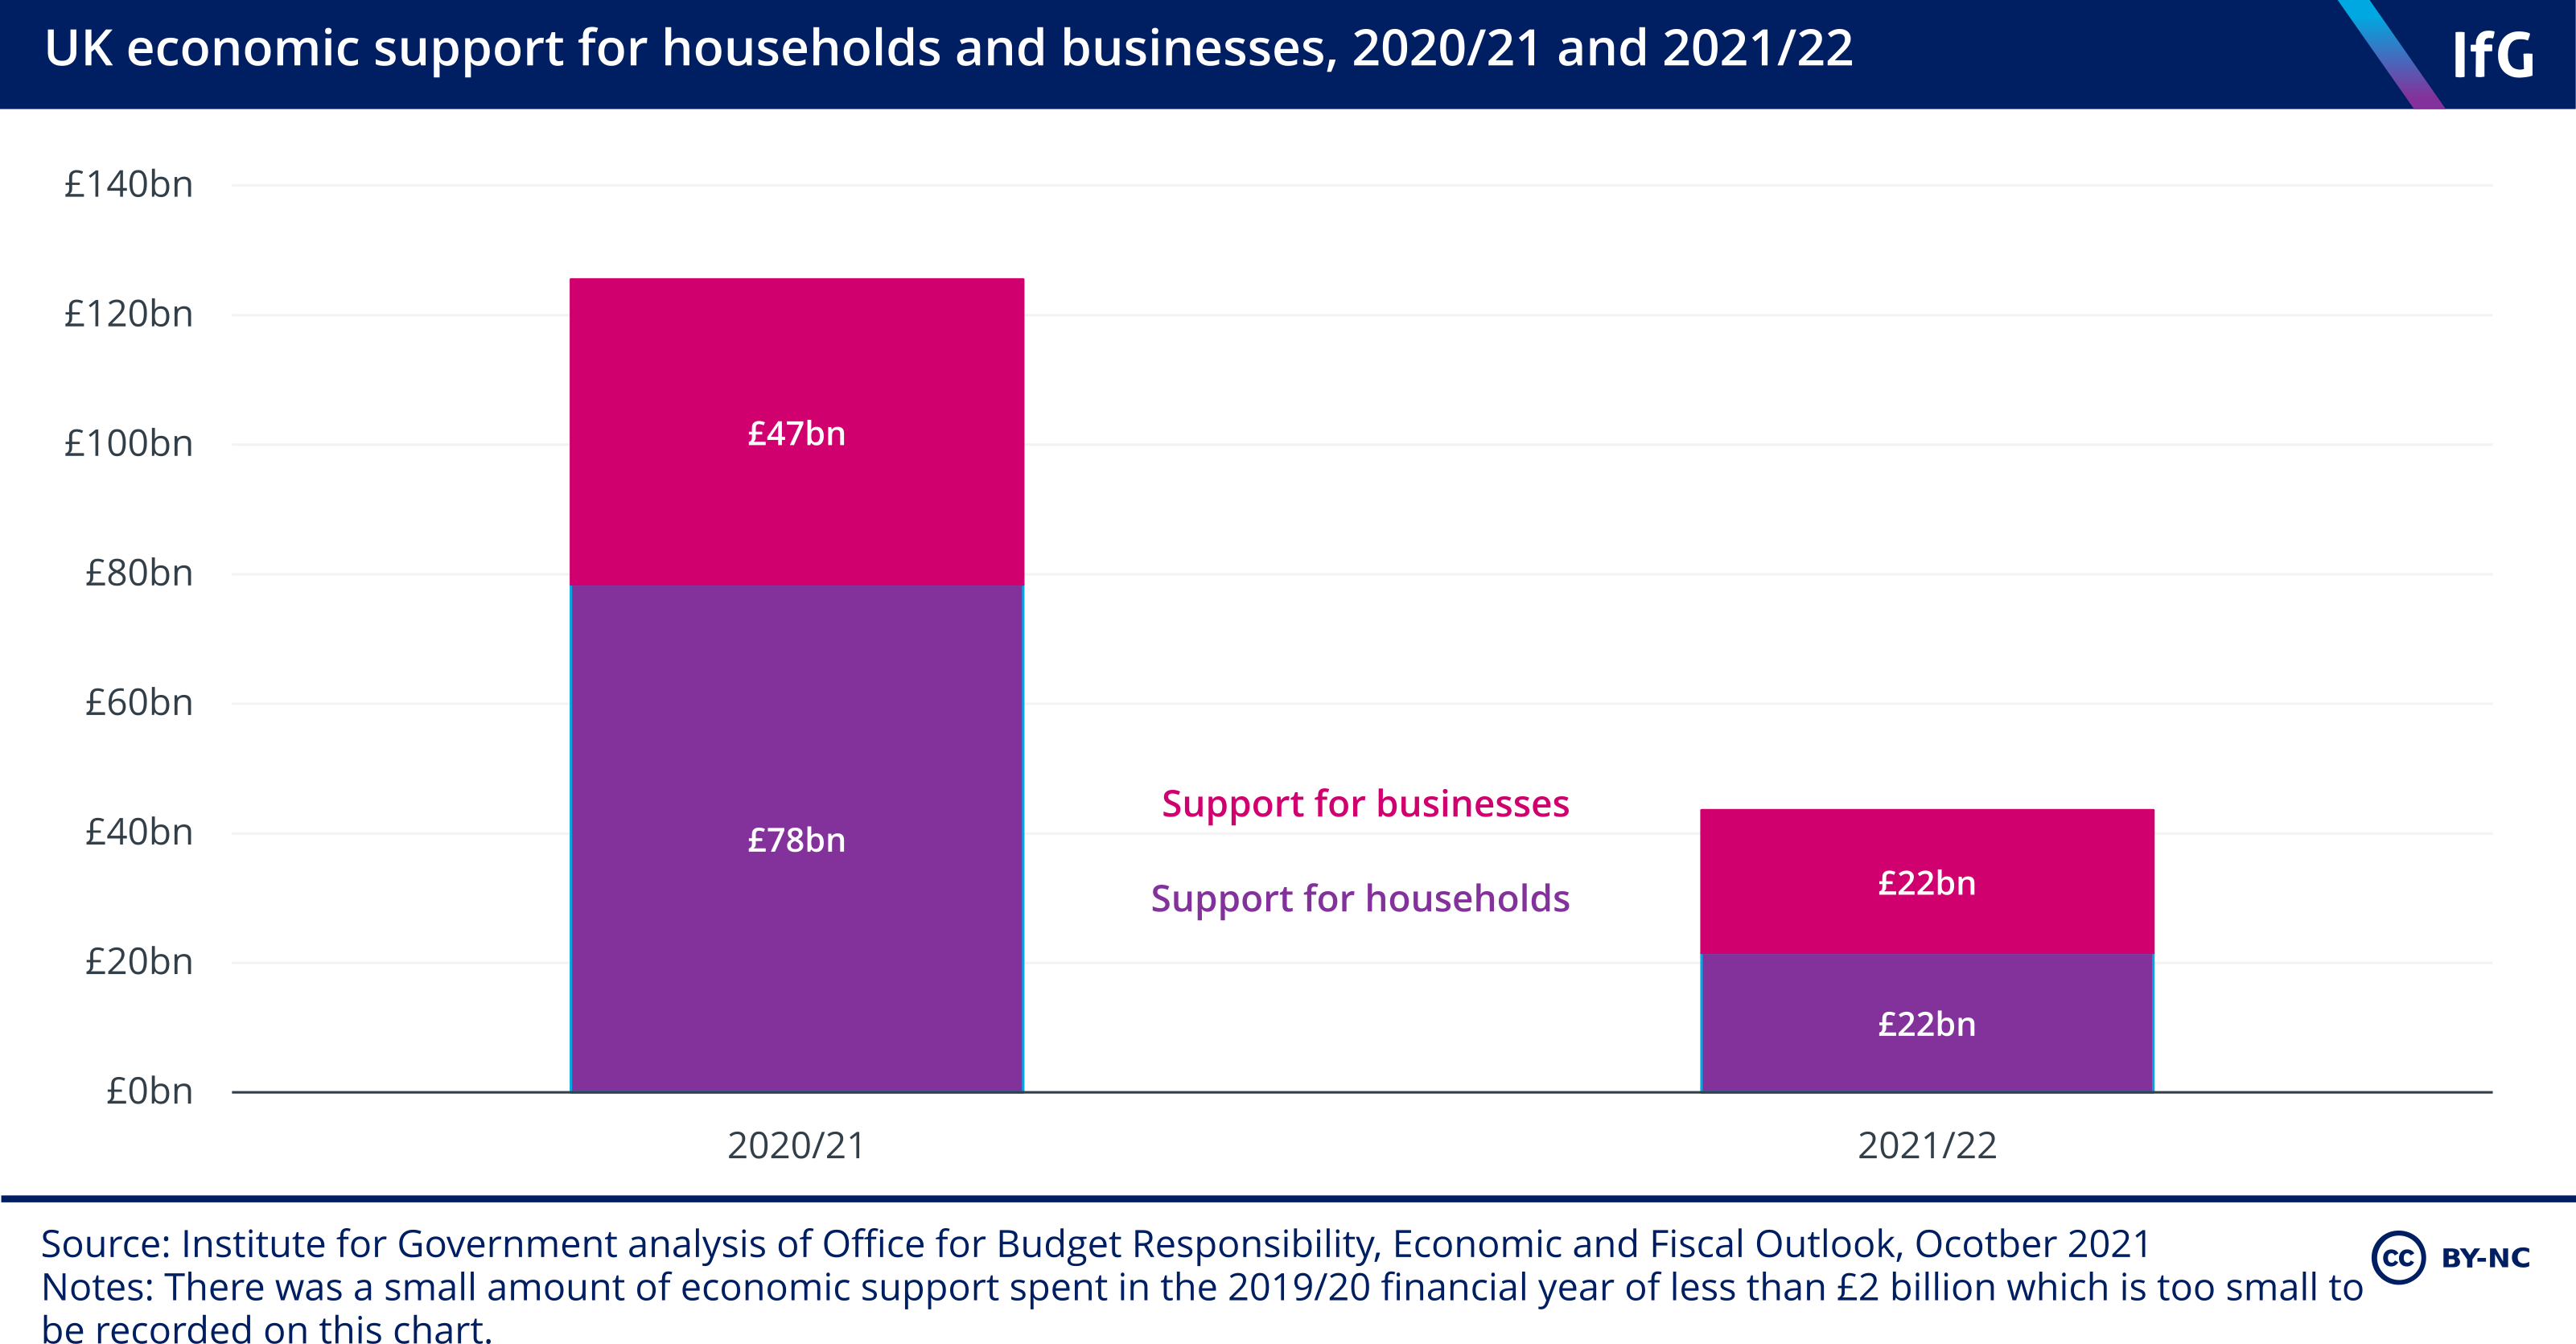 UK economic support for households and businesses, 2020/21 and 2021/22)